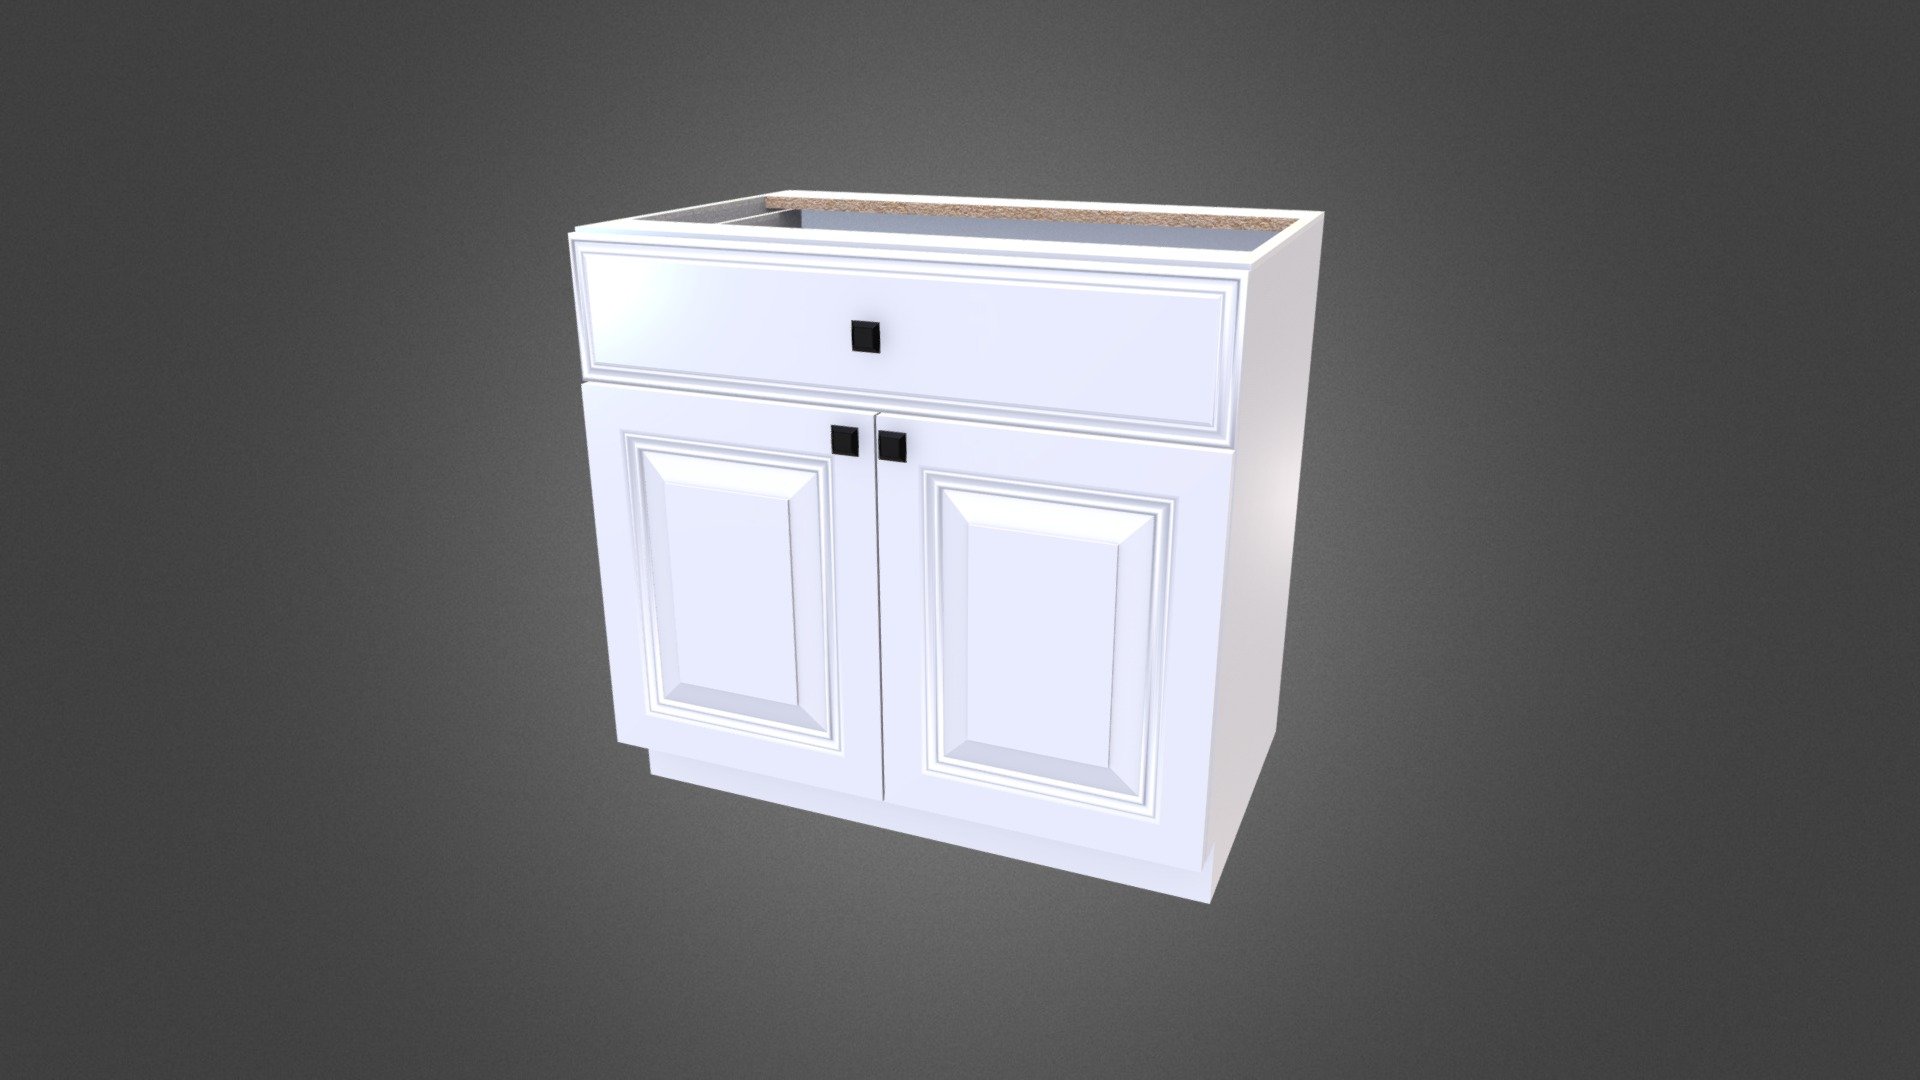 Premium low polygon white panel door base cabinet 3D Model. A full set of PBR textures were used to detail this model, all measuring 2048px by 2048px. This model may be used in a variety of real-time applications and pre-rendered scenes.

Features:




All quad geometry, no tris or n-gons

High quality 2048px by 2048px textures for PBR workflows (Albedo/Color, Normal, Roughness, Metalness, Occlusion &amp; Occlusion/Roughness/Metallic Combined RBG Map)

Organized, Non-Overlapping UV Map

Measures 91.44cm x 63.976cm x 87.63cm
 - White Panel Door Cabinet - Buy Royalty Free 3D model by Meerschaum Digital (@meerschaumdigital) 3d model